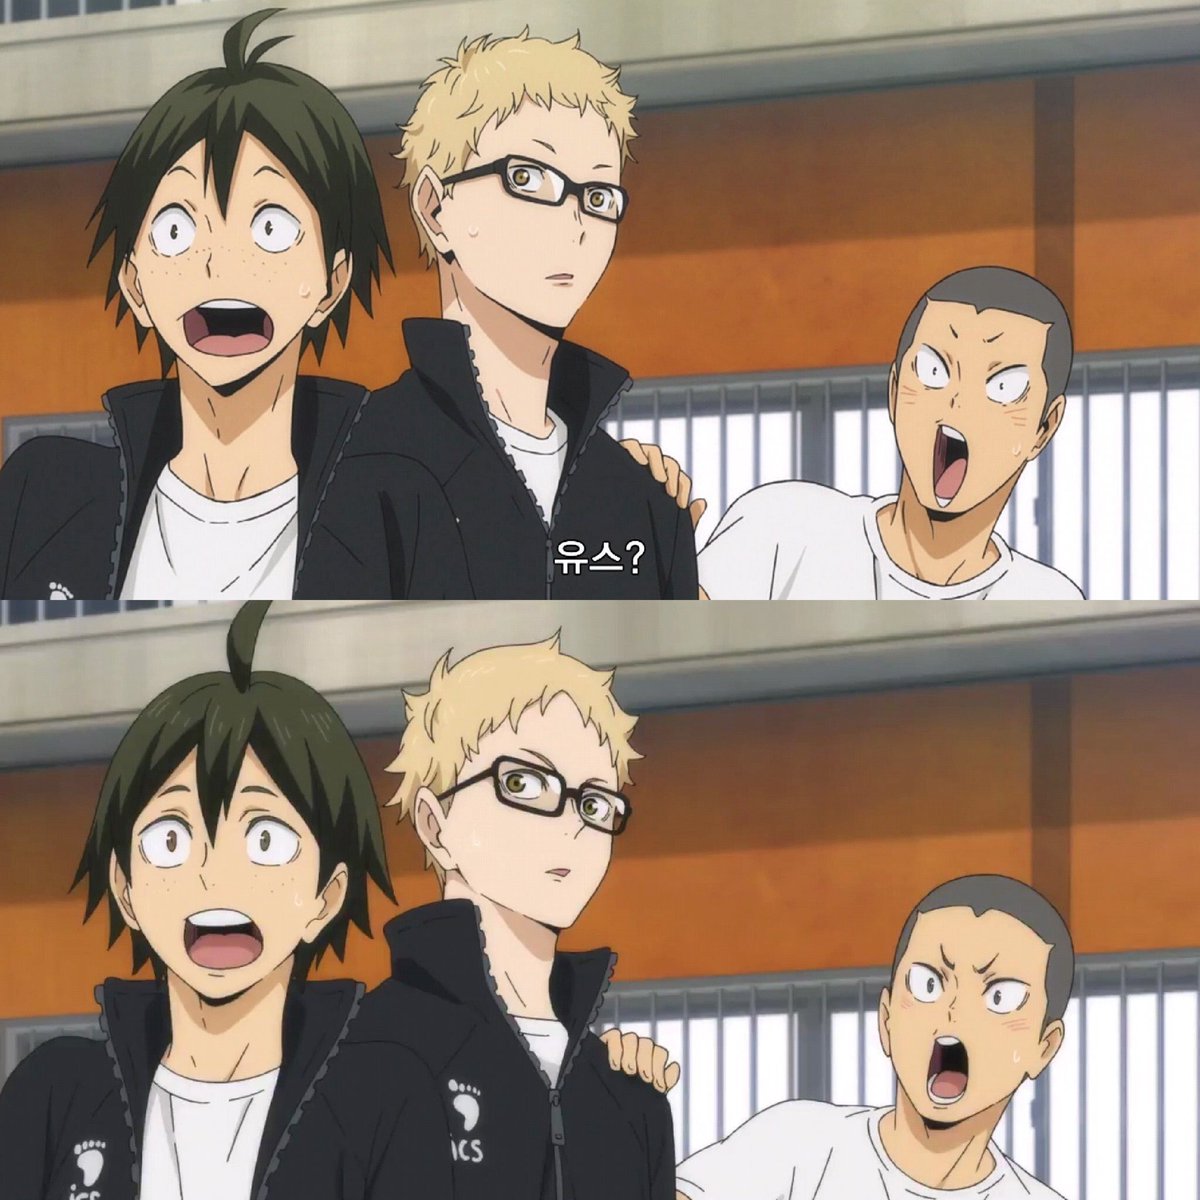 Haikyuu design comparisons for S3 and S4!ハ イ キ ュ- #hq_anime.